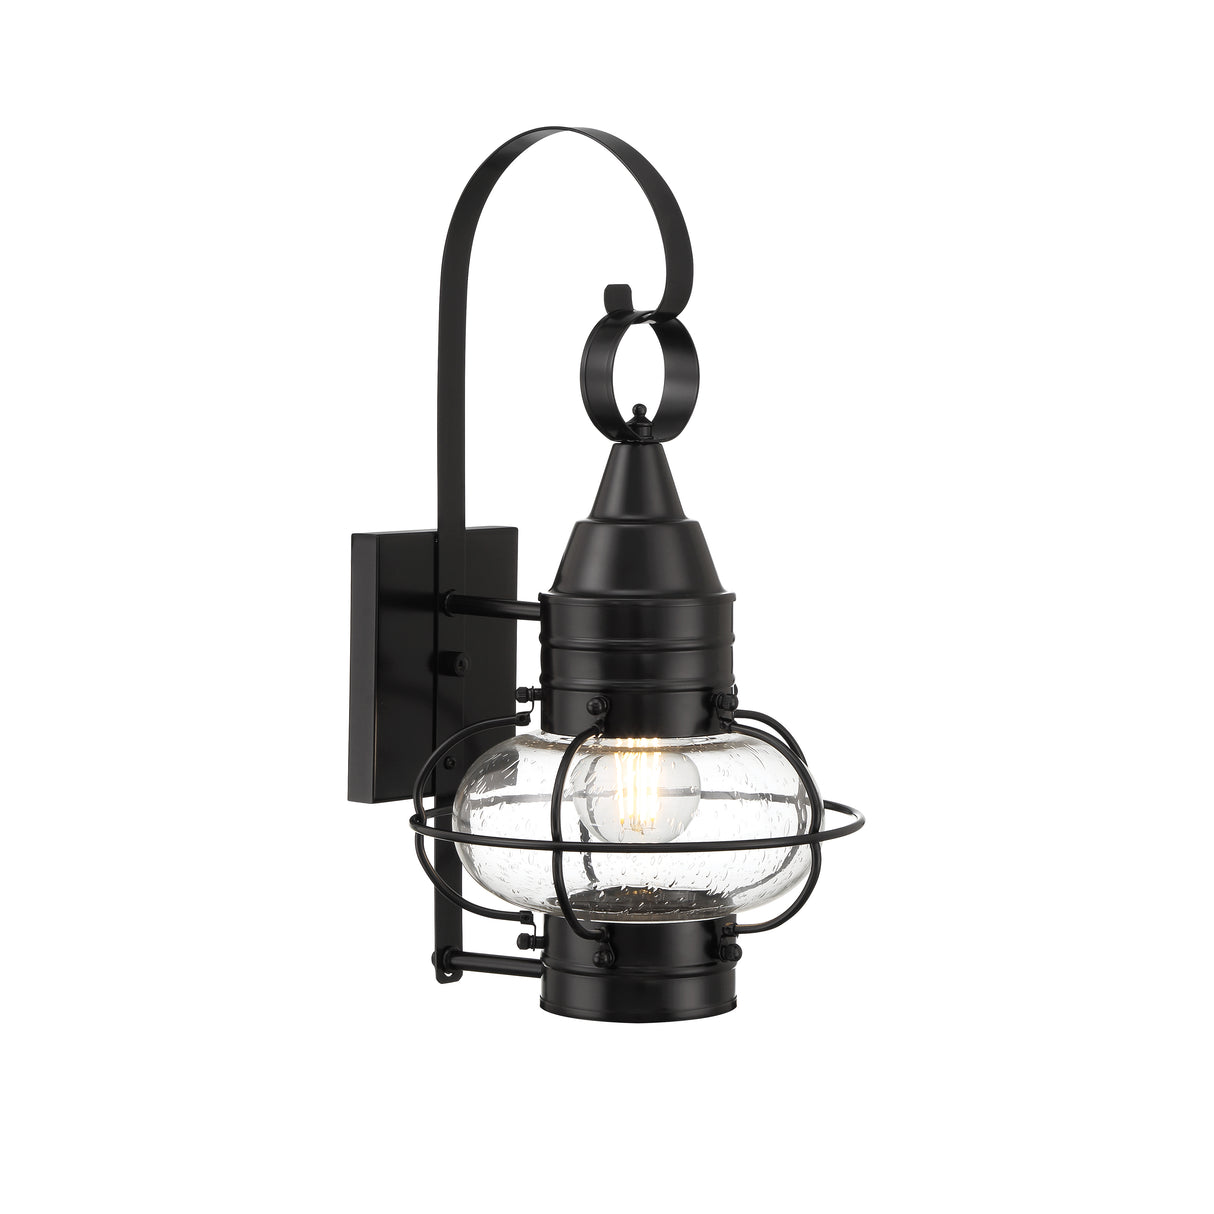 Elk 1513-BL-SE Classic Onion Outdoor Wall Light - Black with Seeded Glass